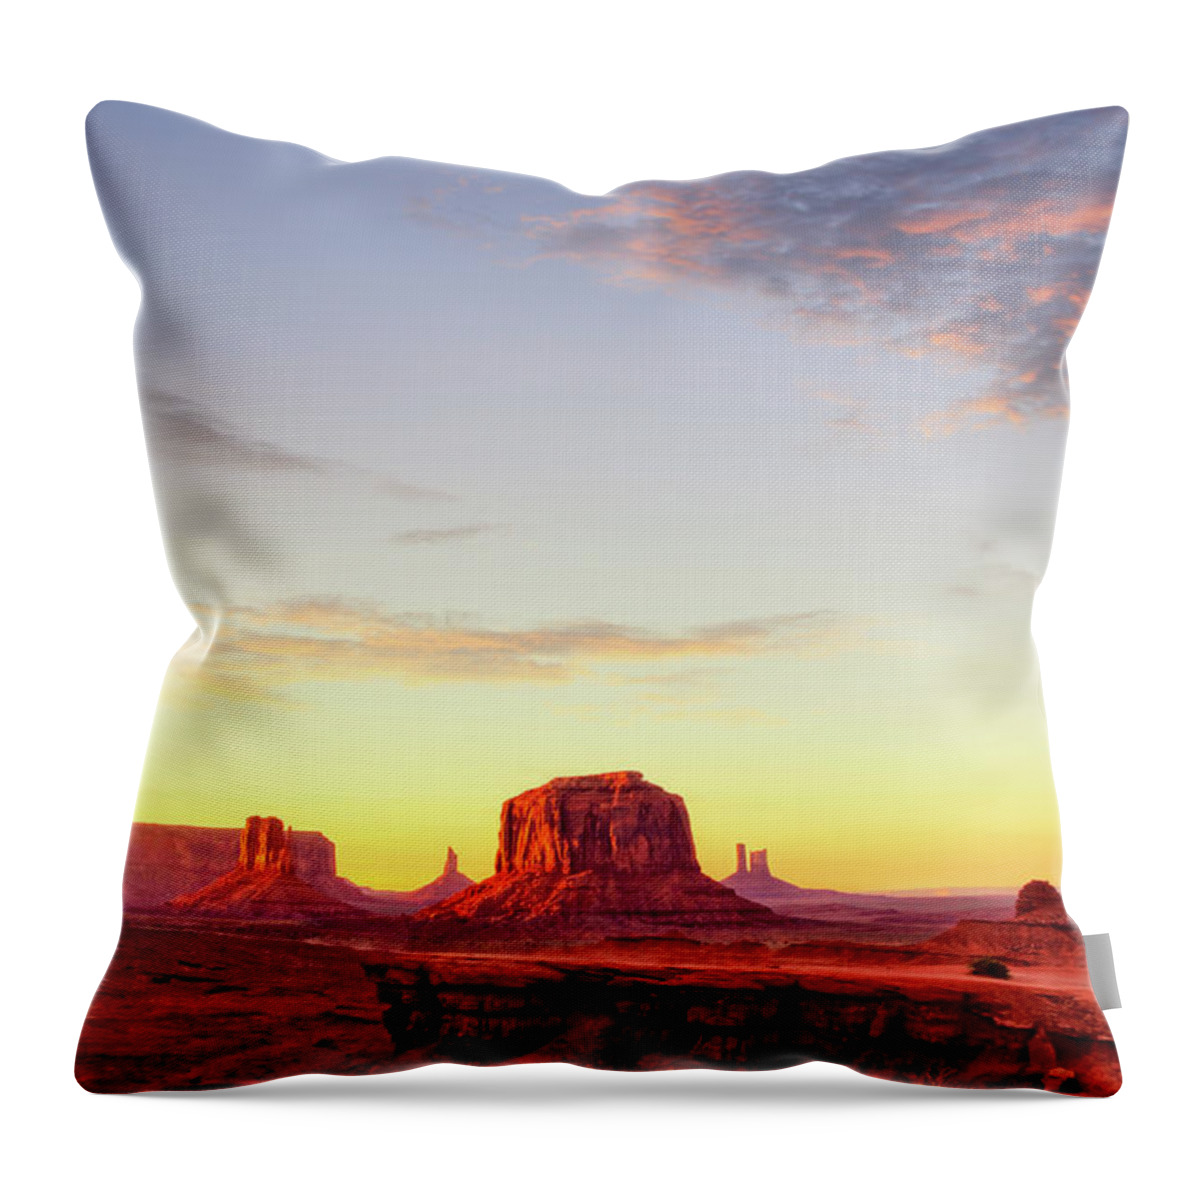 Scenics Throw Pillow featuring the photograph Monument Valley At Sunset by Powerofforever